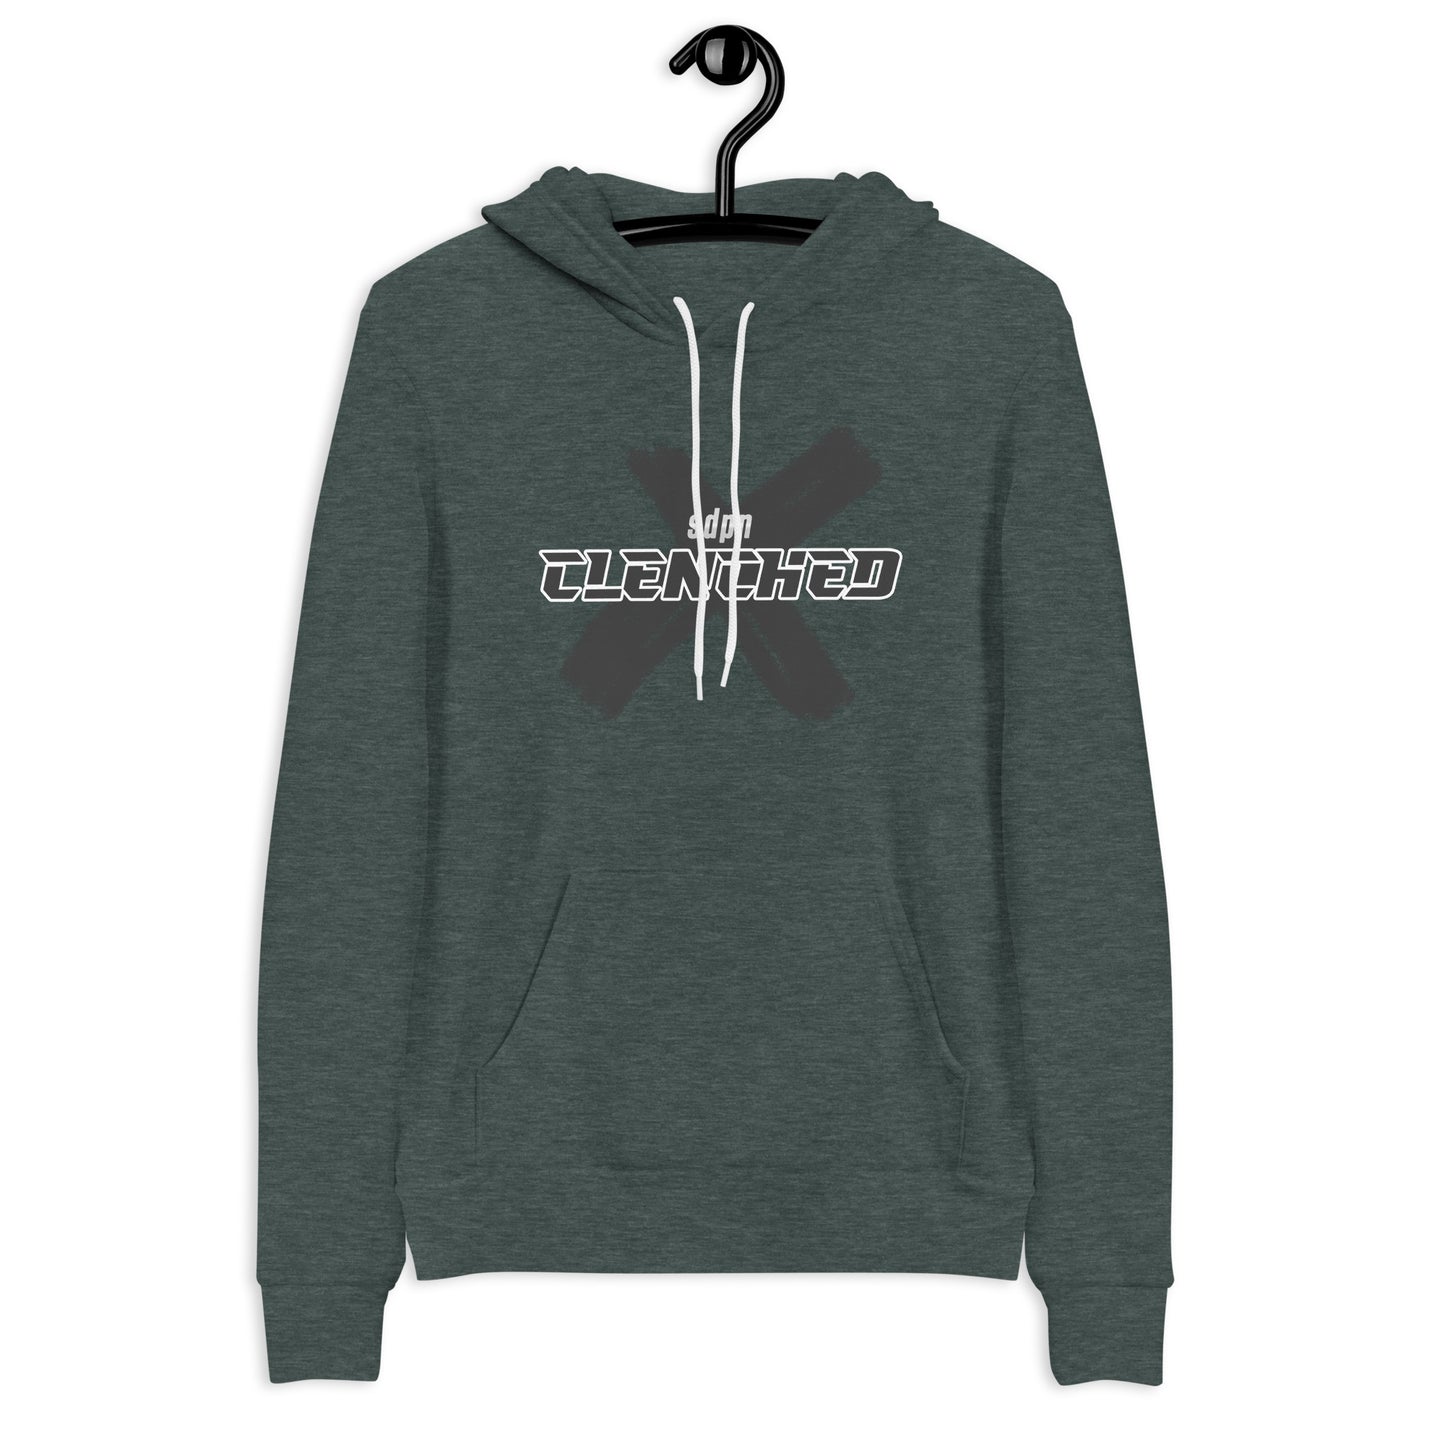 X - Clenched Hoodie